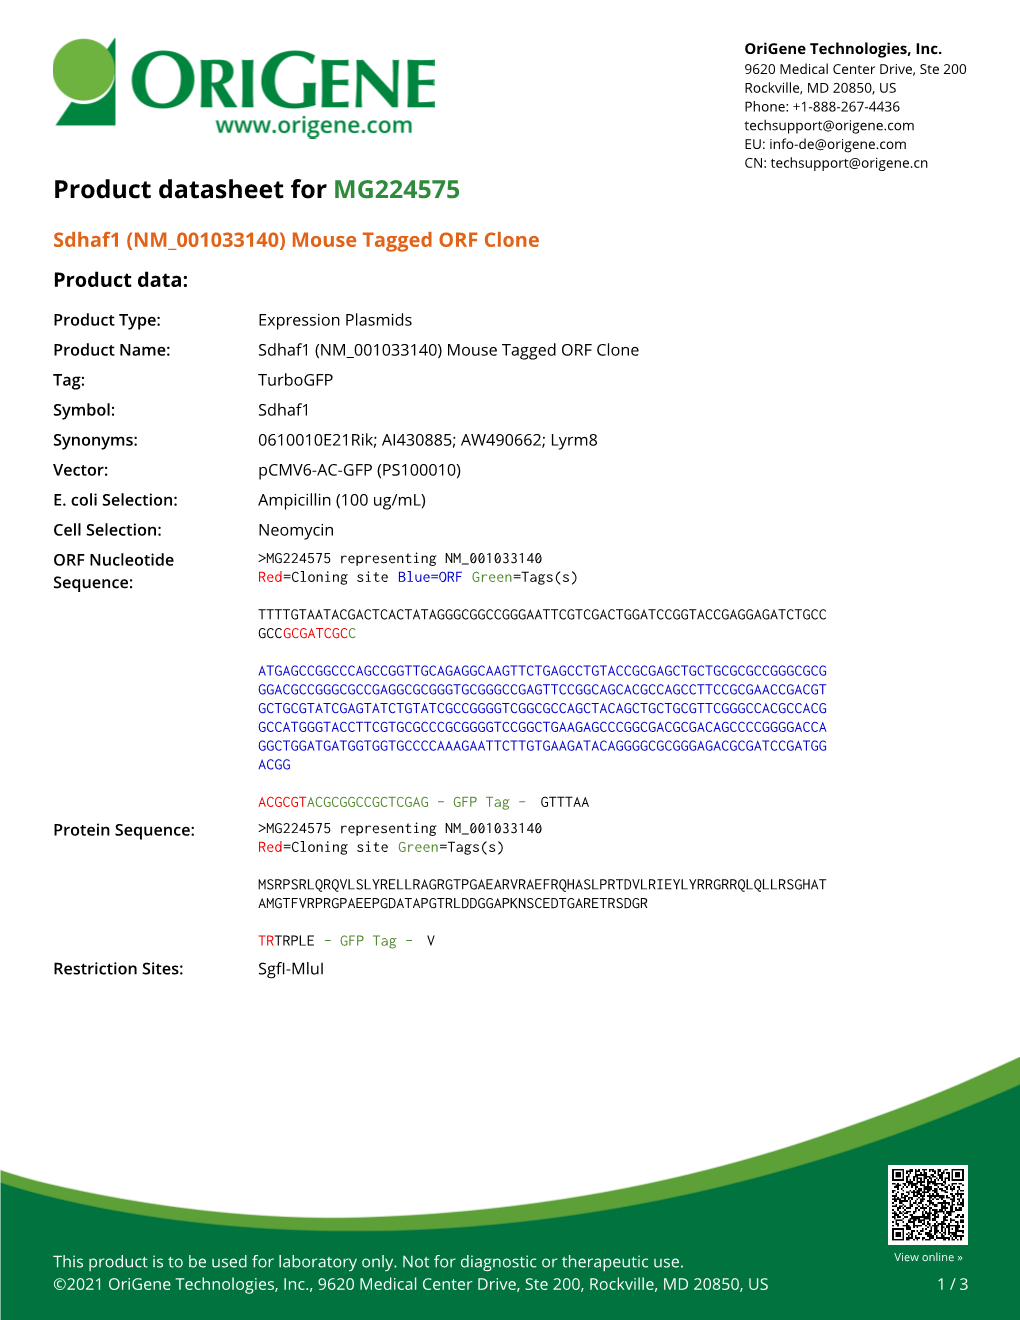 Sdhaf1 (NM 001033140) Mouse Tagged ORF Clone Product Data